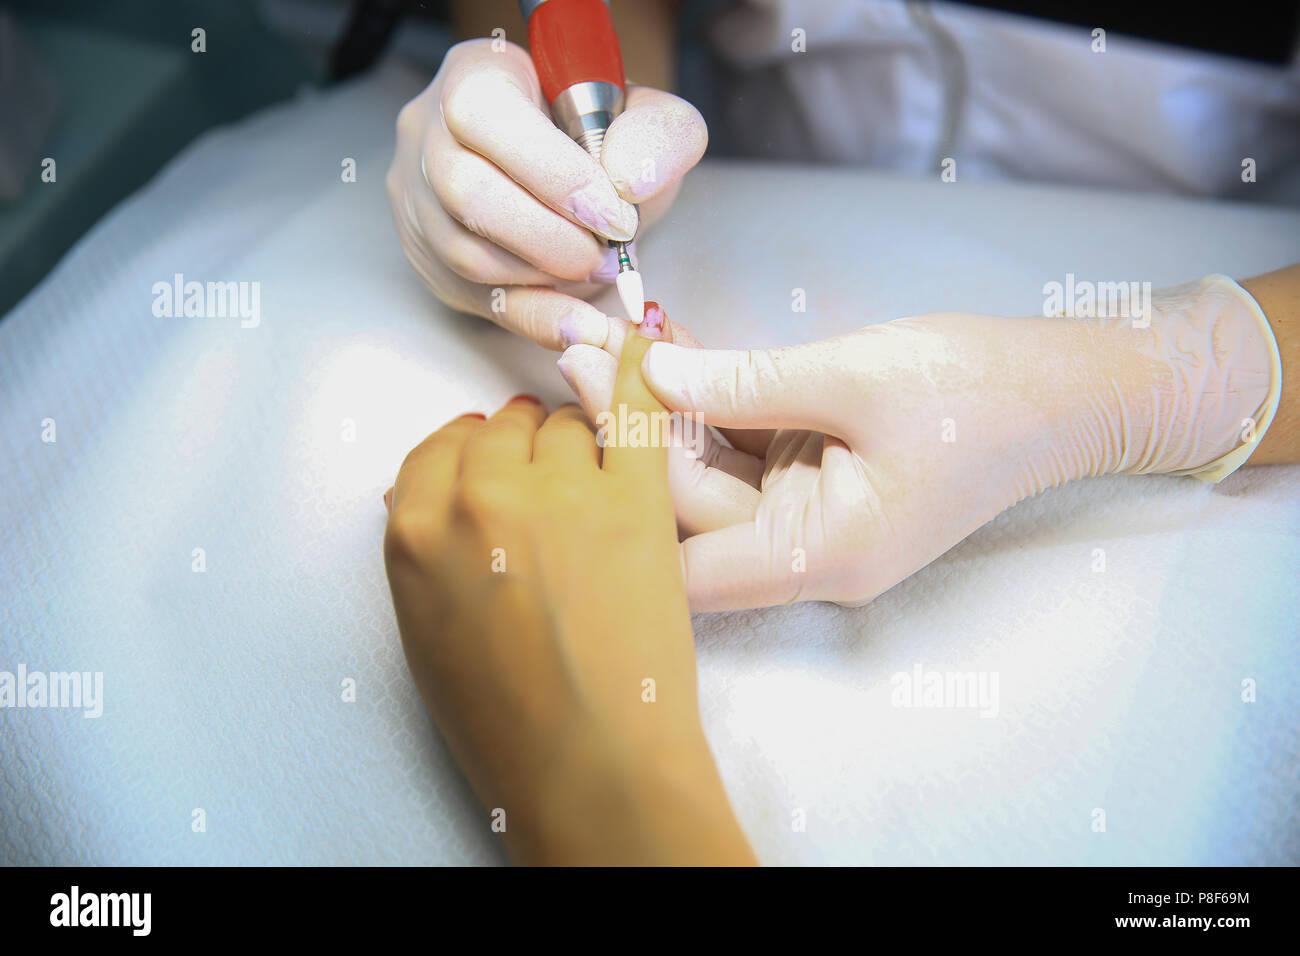 Sawing nails removing manicure, professional work in the beauty salon Stock Photo